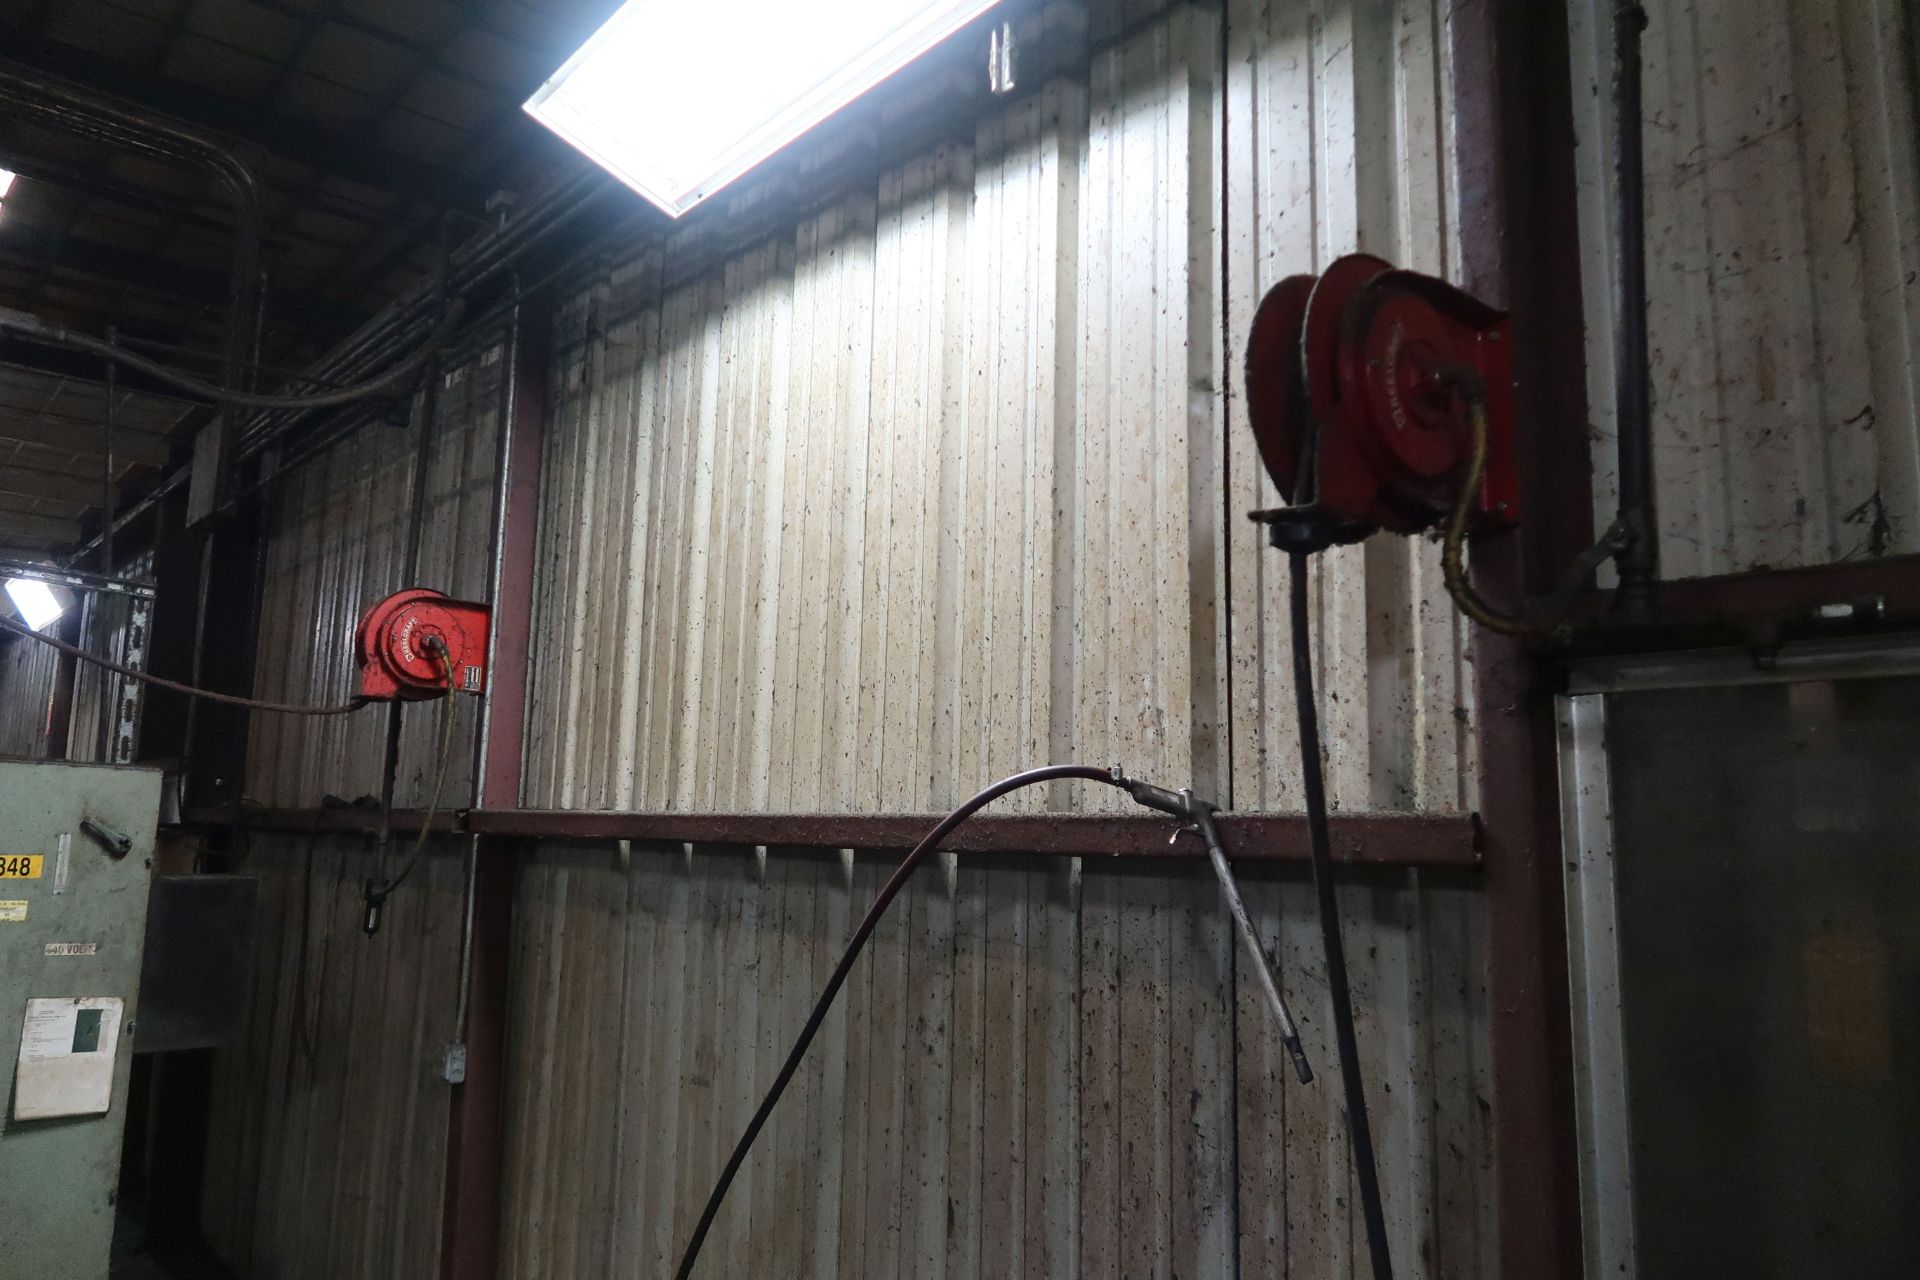 WALL MOUNTED AIR LINE REELS **LOADING PRICE DUE TO ERRA - $60.00** - Image 2 of 2